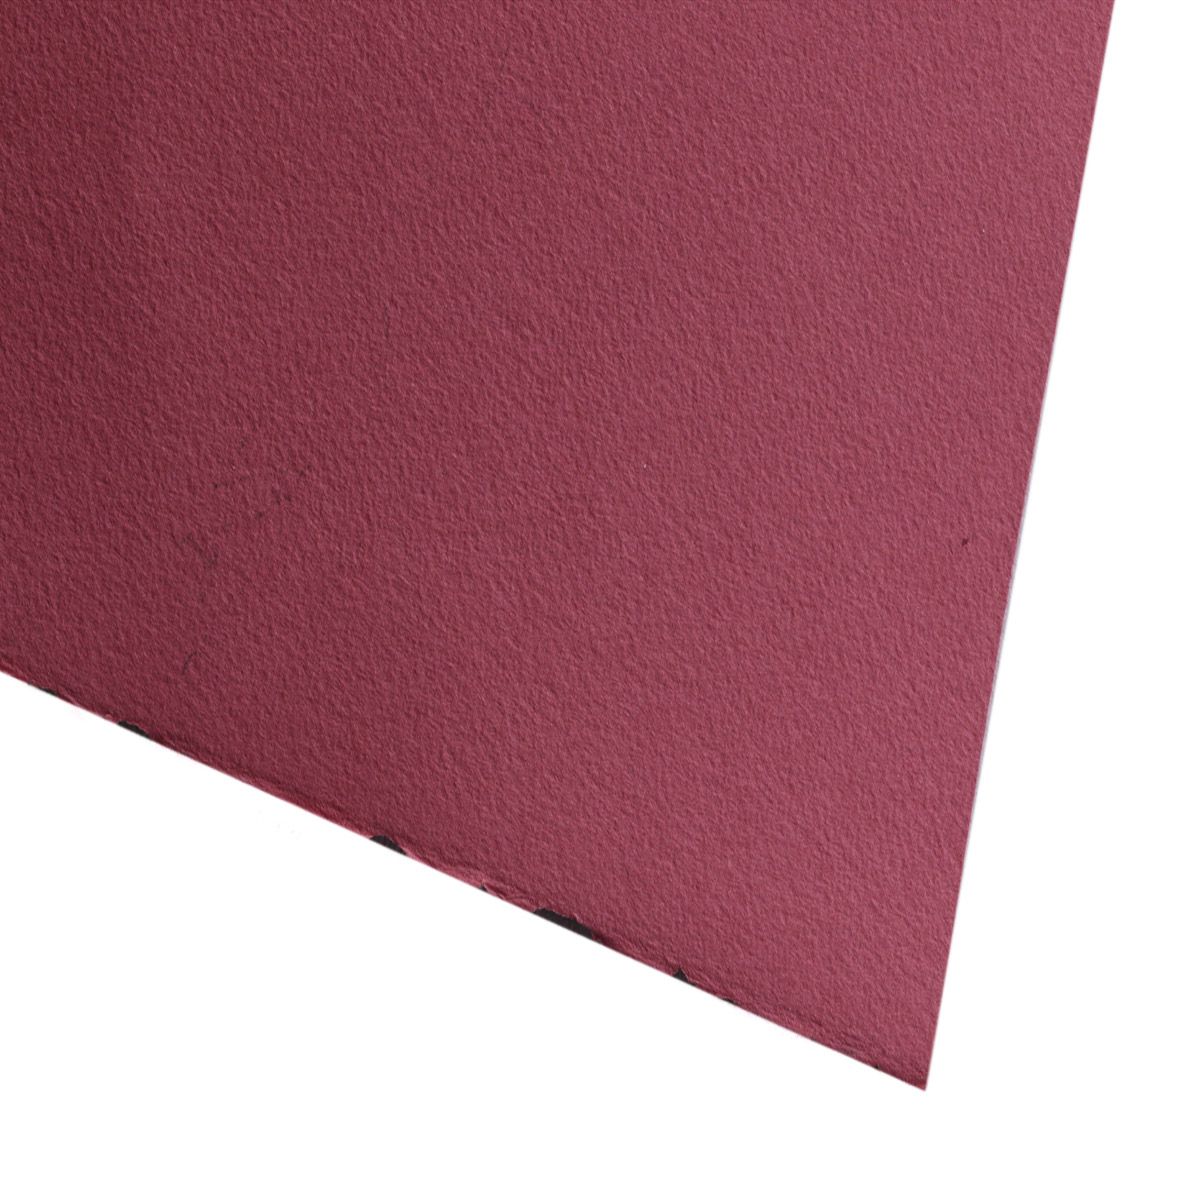 Fabriano Cromia Paper Sheet Pale Amaranth 19.6